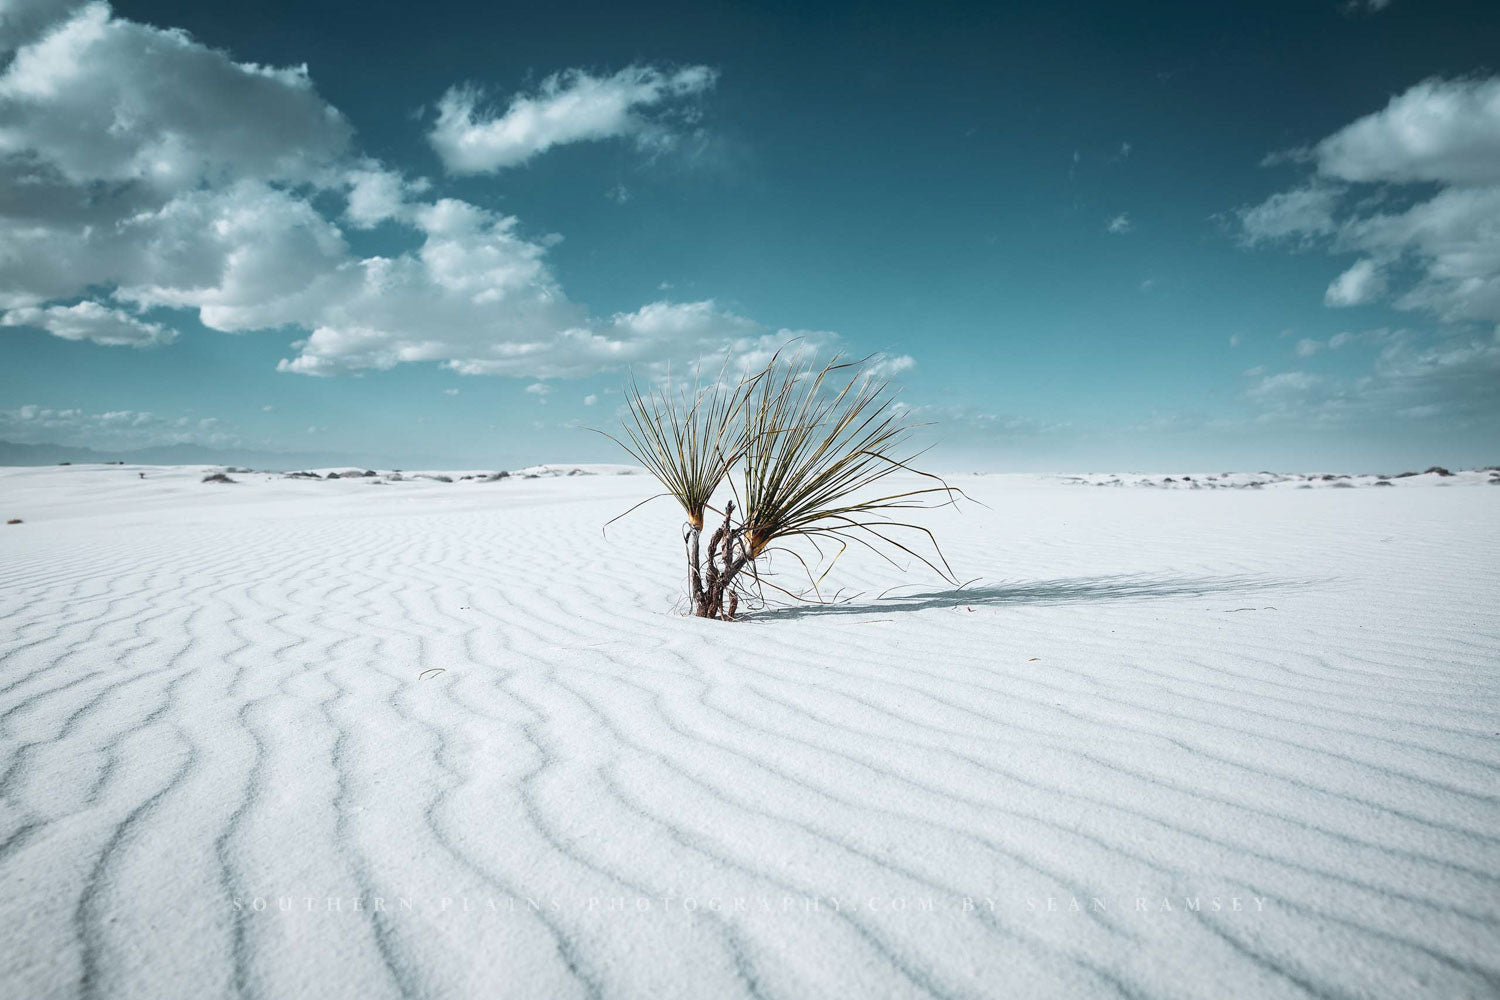 Vintage style print of a yucca plant in the rippled sand of White Sands National Park near Alamogordo, New Mexico by Sean Ramsey of Southern Plains Photography.